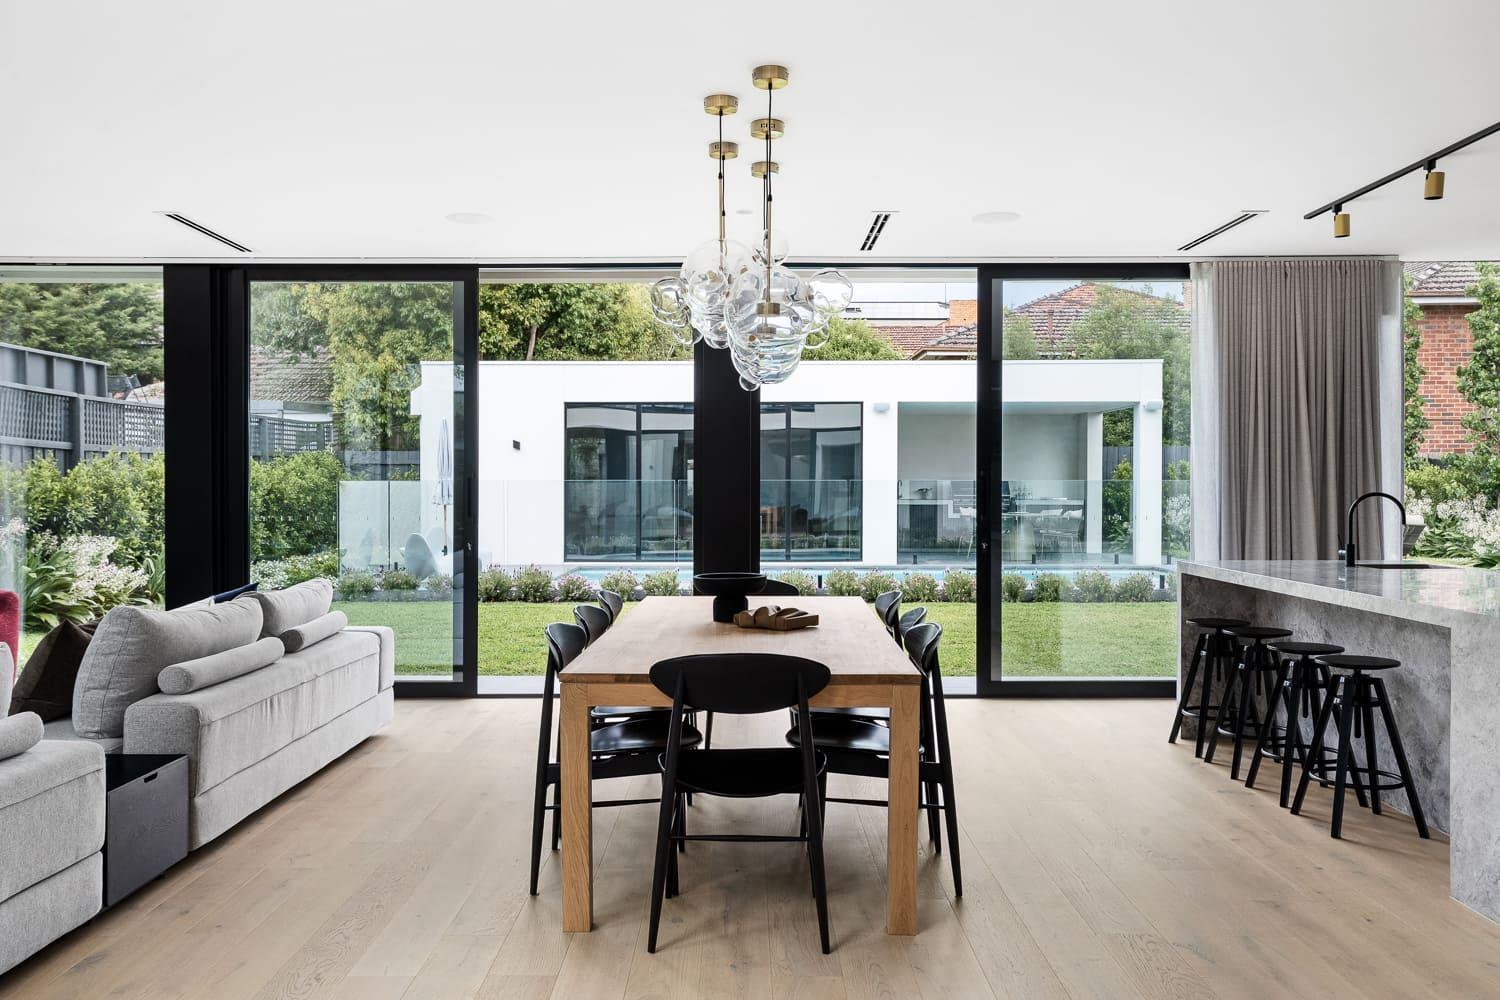 A sleek, contemporary kitchen and dining area in a modern home